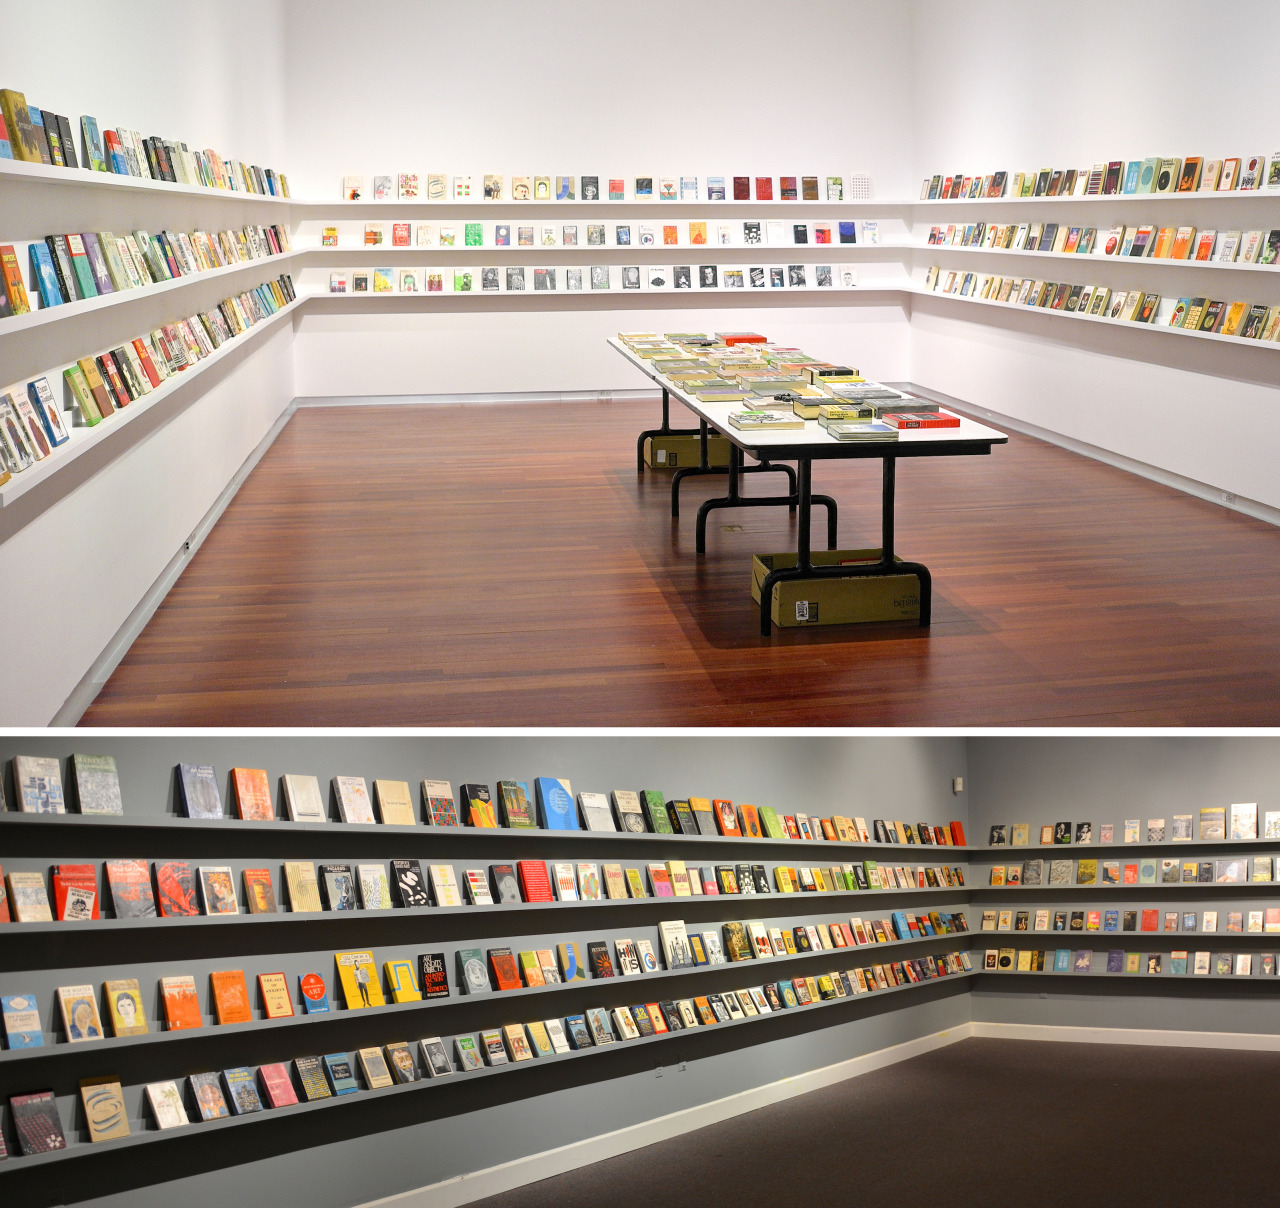 UNTITLED PROJECT: ROBERT SMITHSON LIBRARY & BOOK CLUB, Oil paint on carved wood, dimensions variable, 2014—2019
>> Untitled Project: Robert Smithson Library & Book Club consists of carved and painted book/sculptures based on the titles from the...